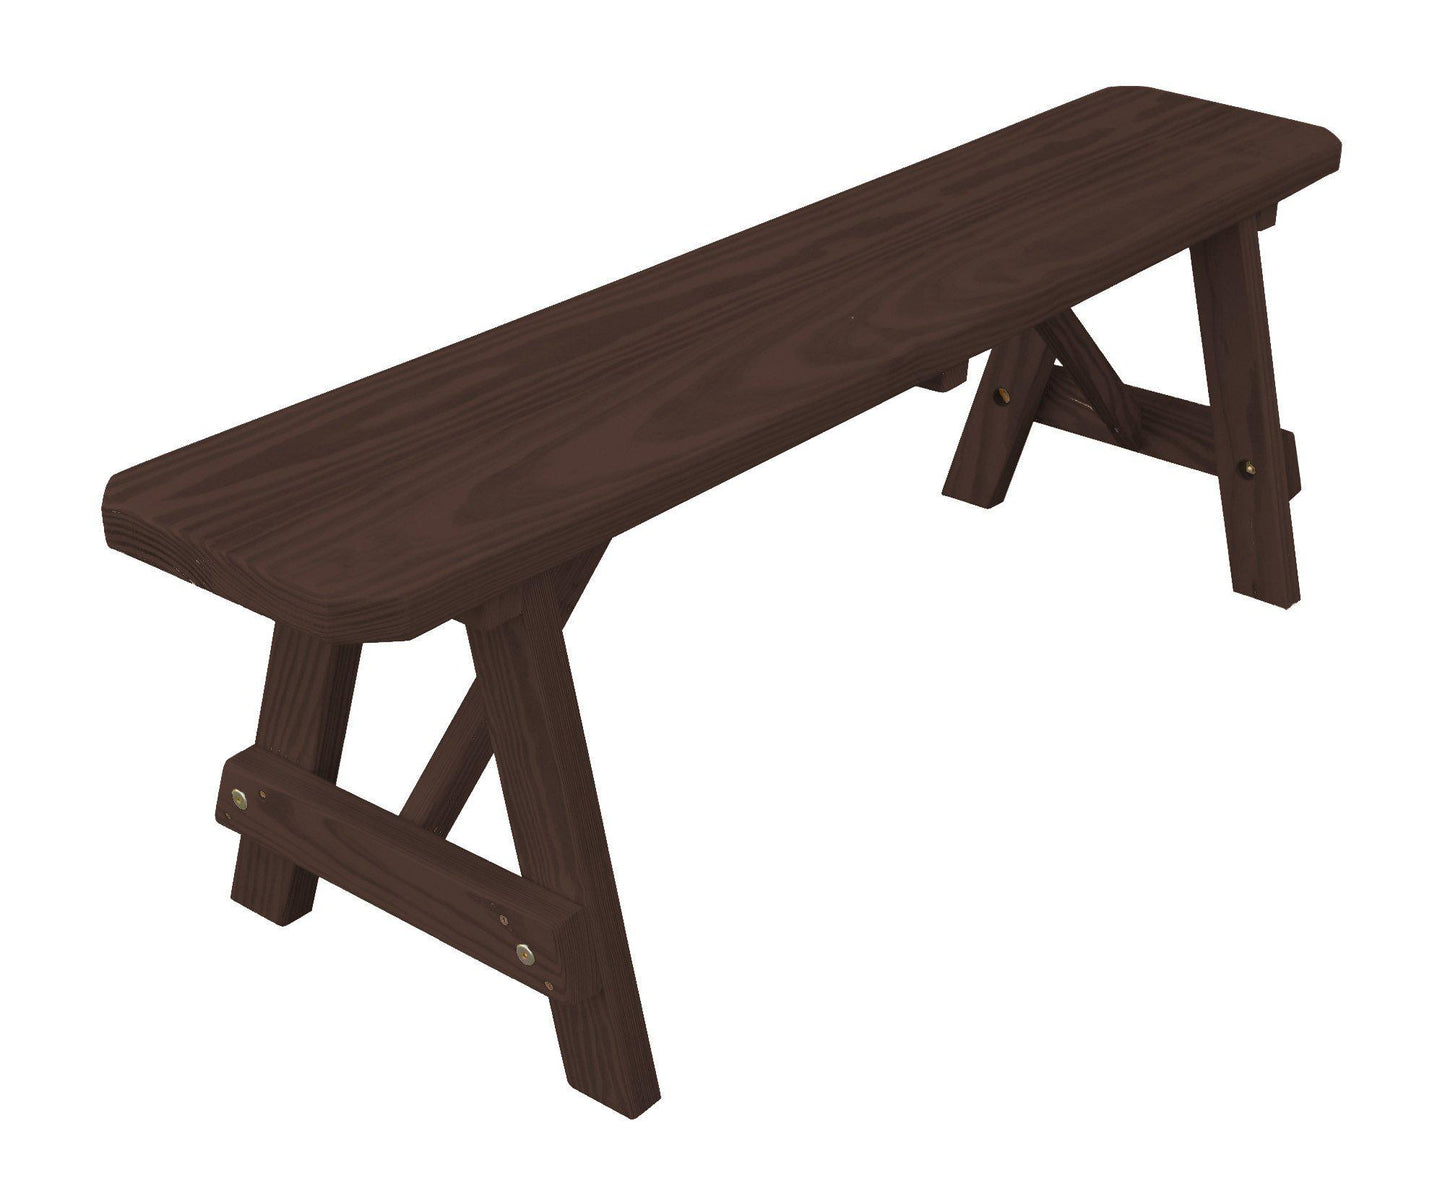 A&L Furniture Co. Pressure Treated Pine 55" Traditional Bench Only - LEAD TIME TO SHIP 10 BUSINESS DAYS